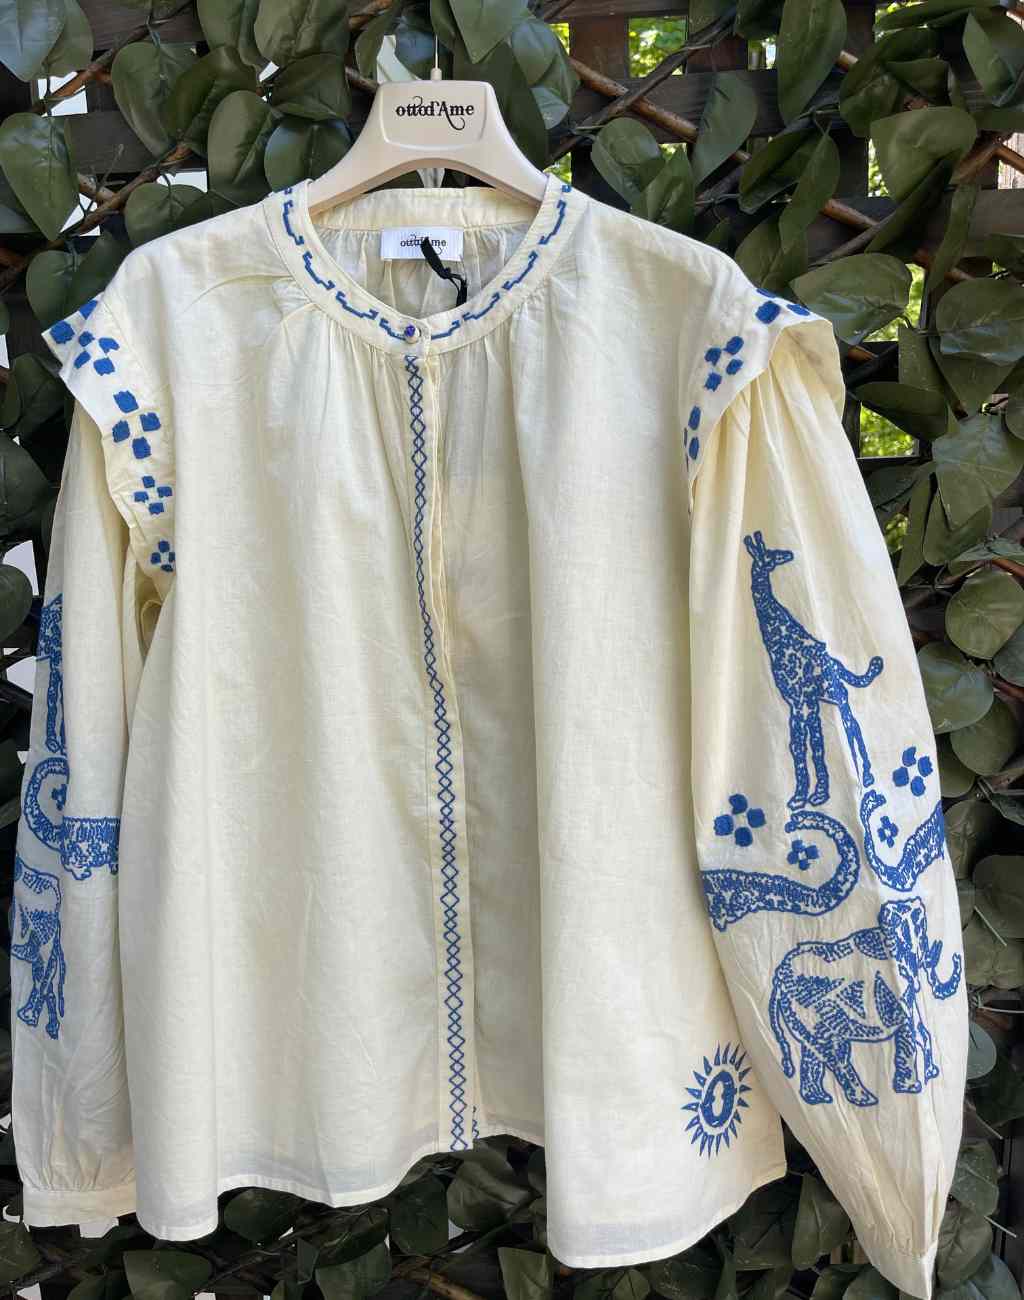 Cotton Top with Embroidery